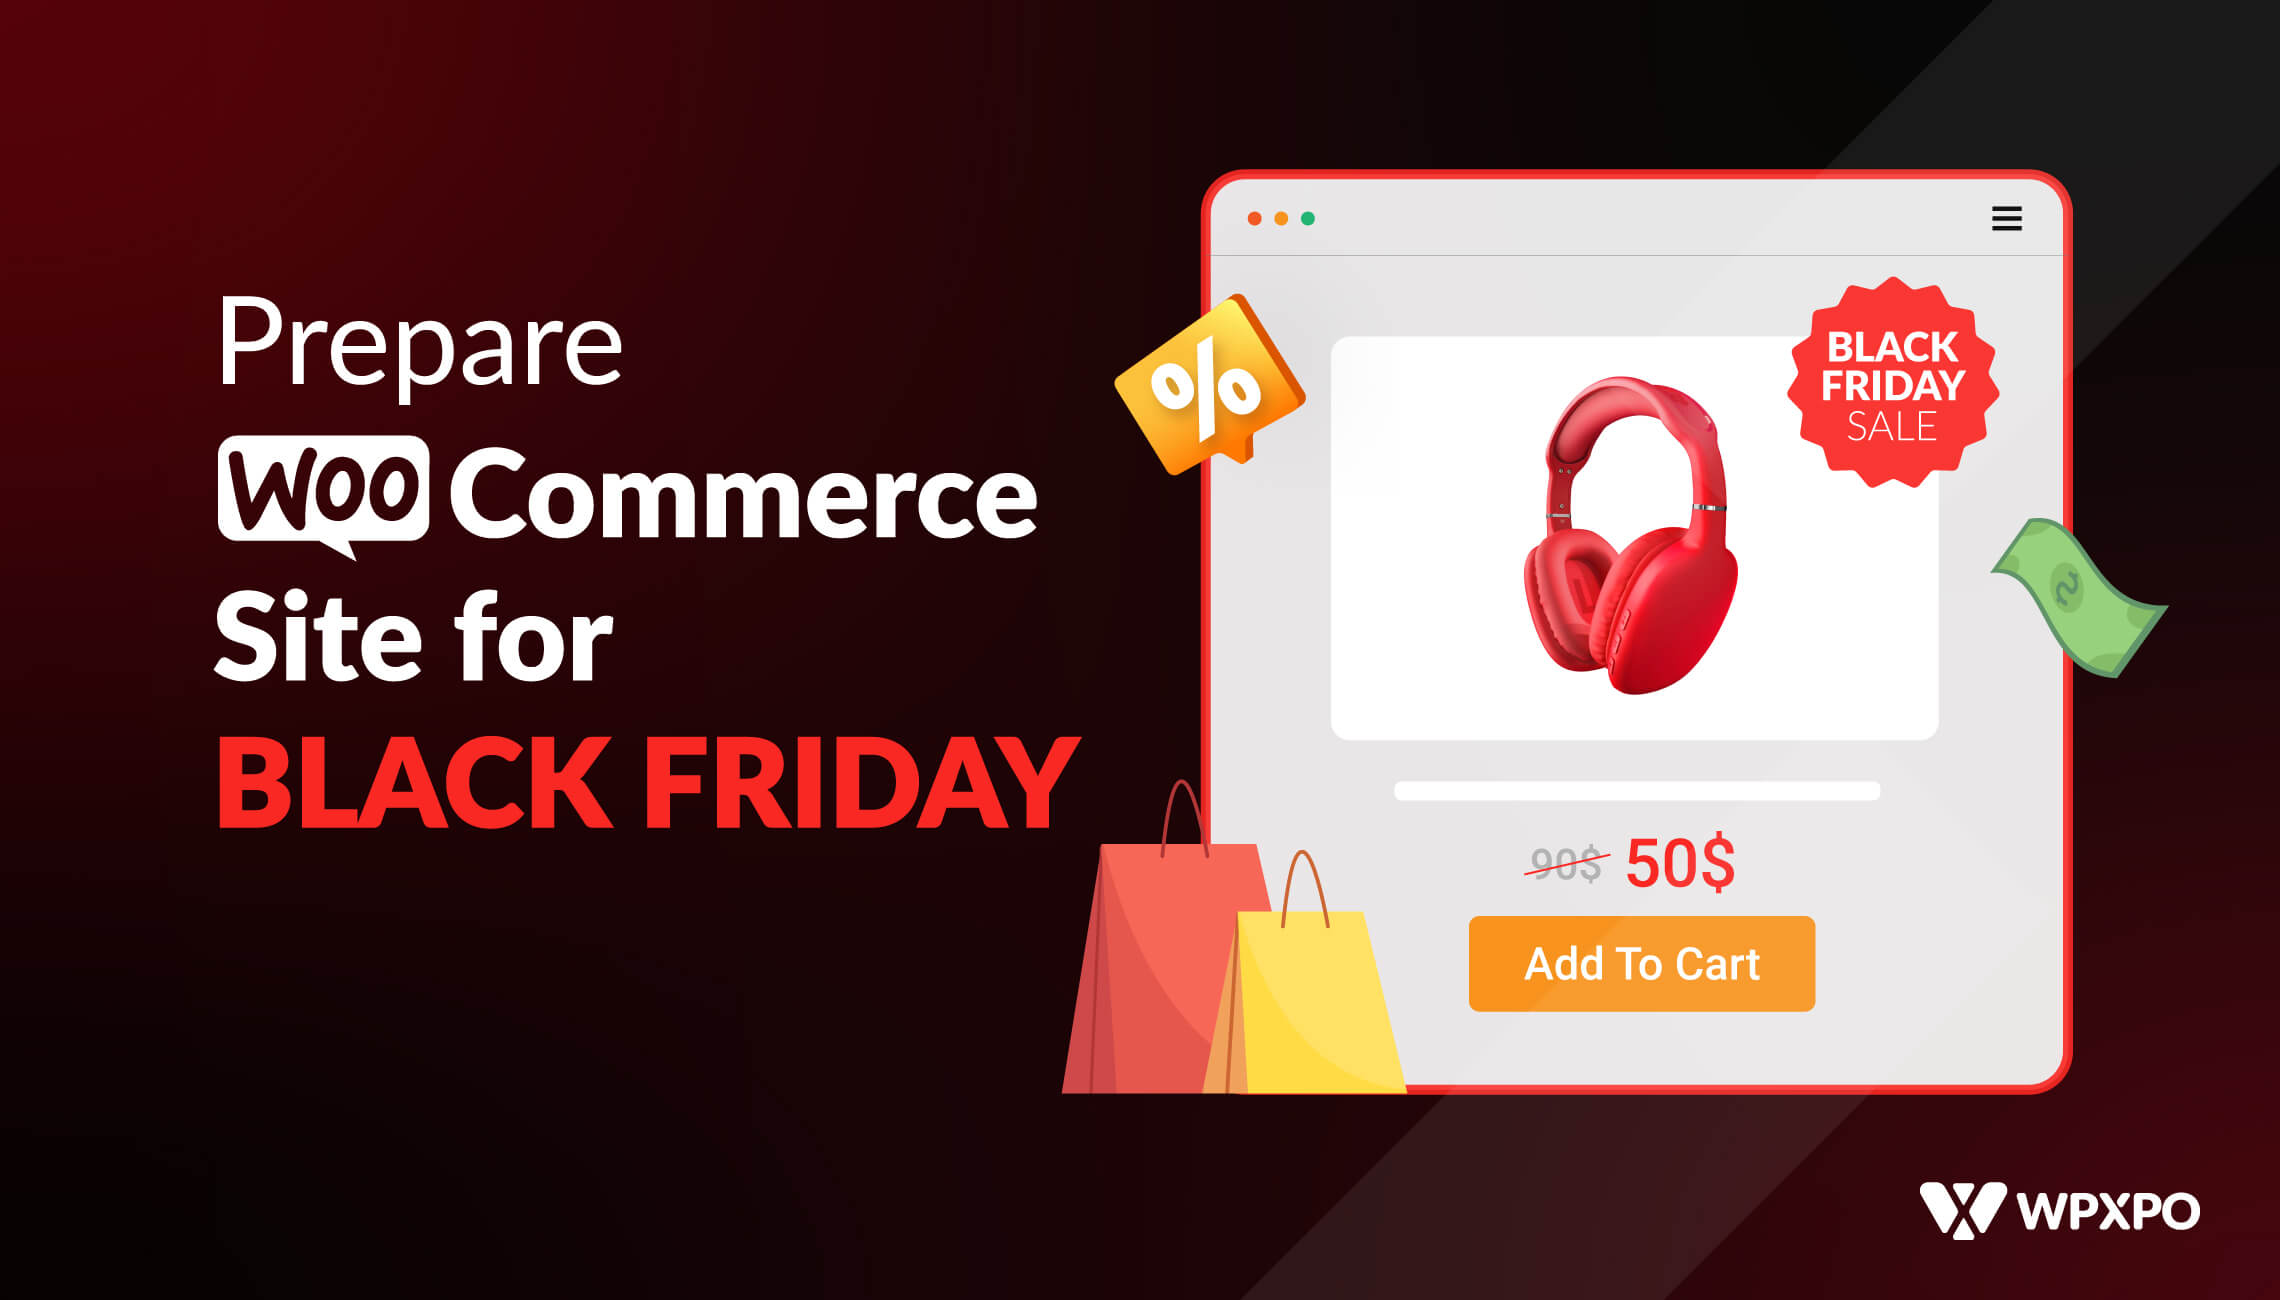 tips on preparing a WooCommerce Store for Black Friday